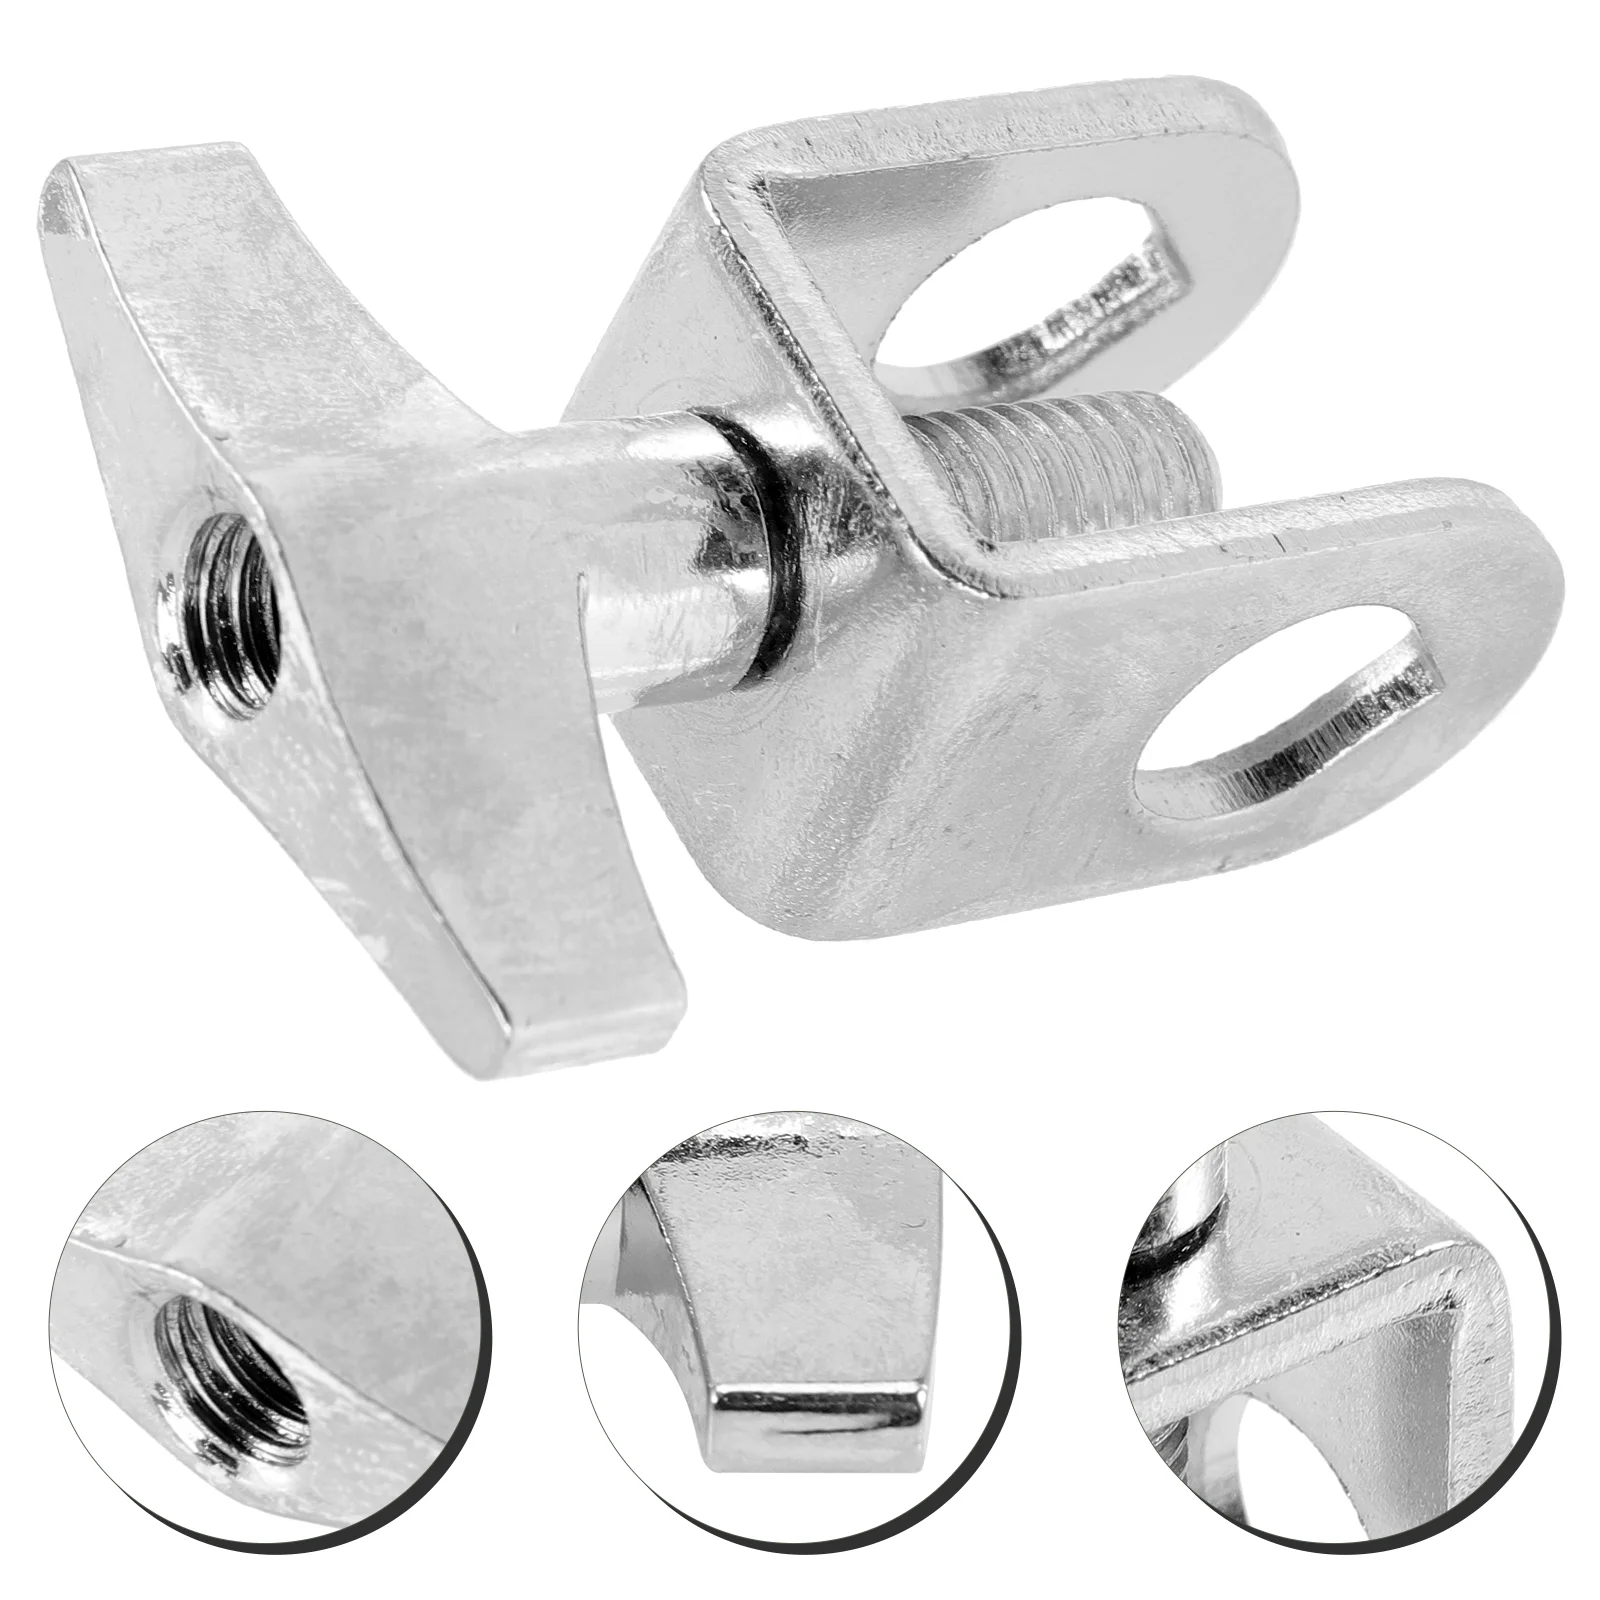 

Standard Cowbell Mounting Bracket Cowbell Clamp Cowbell Extension Stand Mounting Bracket